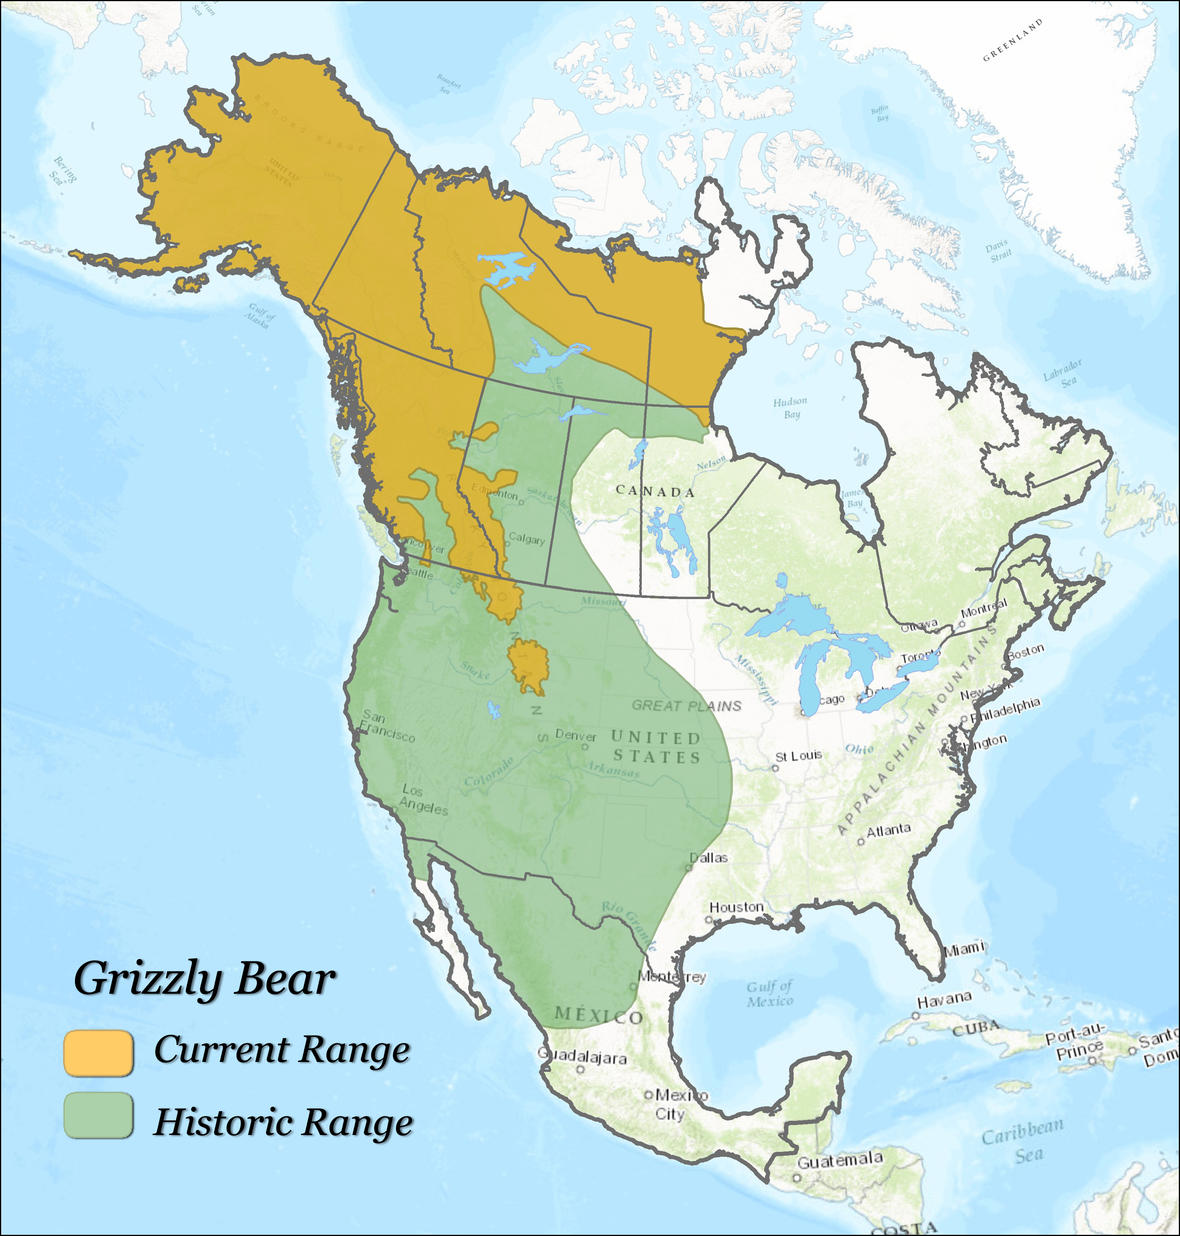 Timeline A History Of Grizzly Bear Recovery In The Lower 48